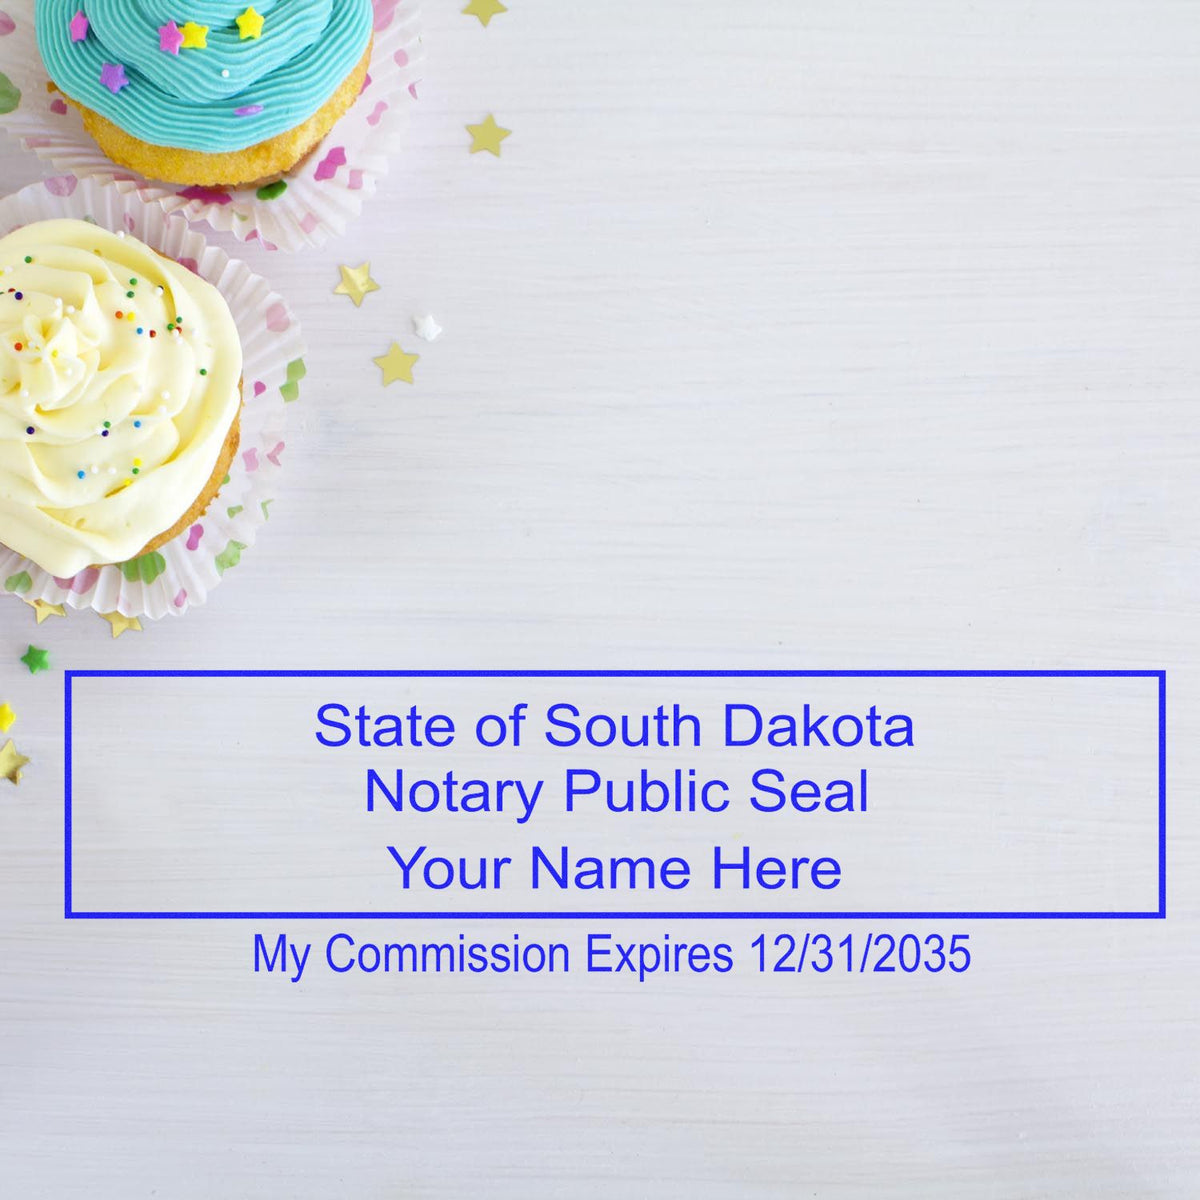 This paper is stamped with a sample imprint of the Wooden Handle South Dakota Rectangular Notary Public Stamp, signifying its quality and reliability.